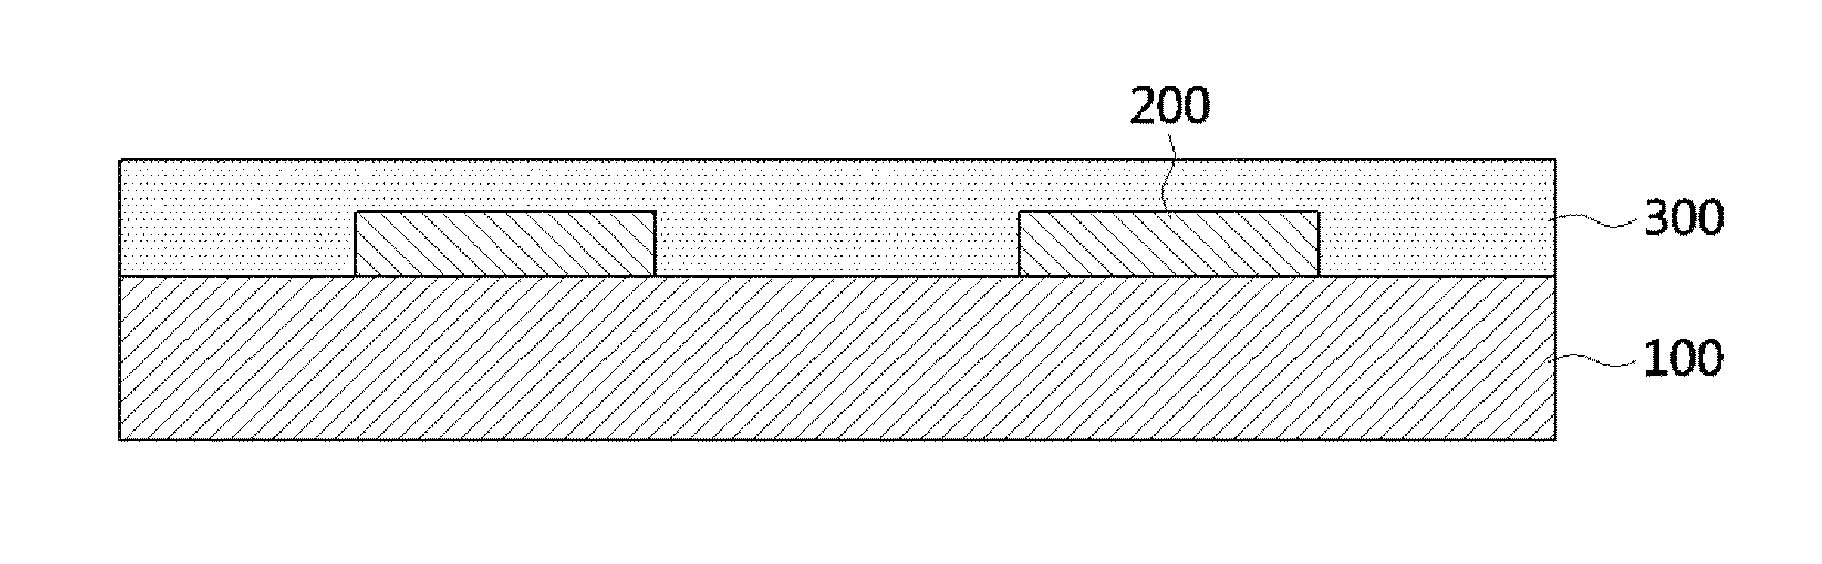 ZnO film structure and method of forming the same